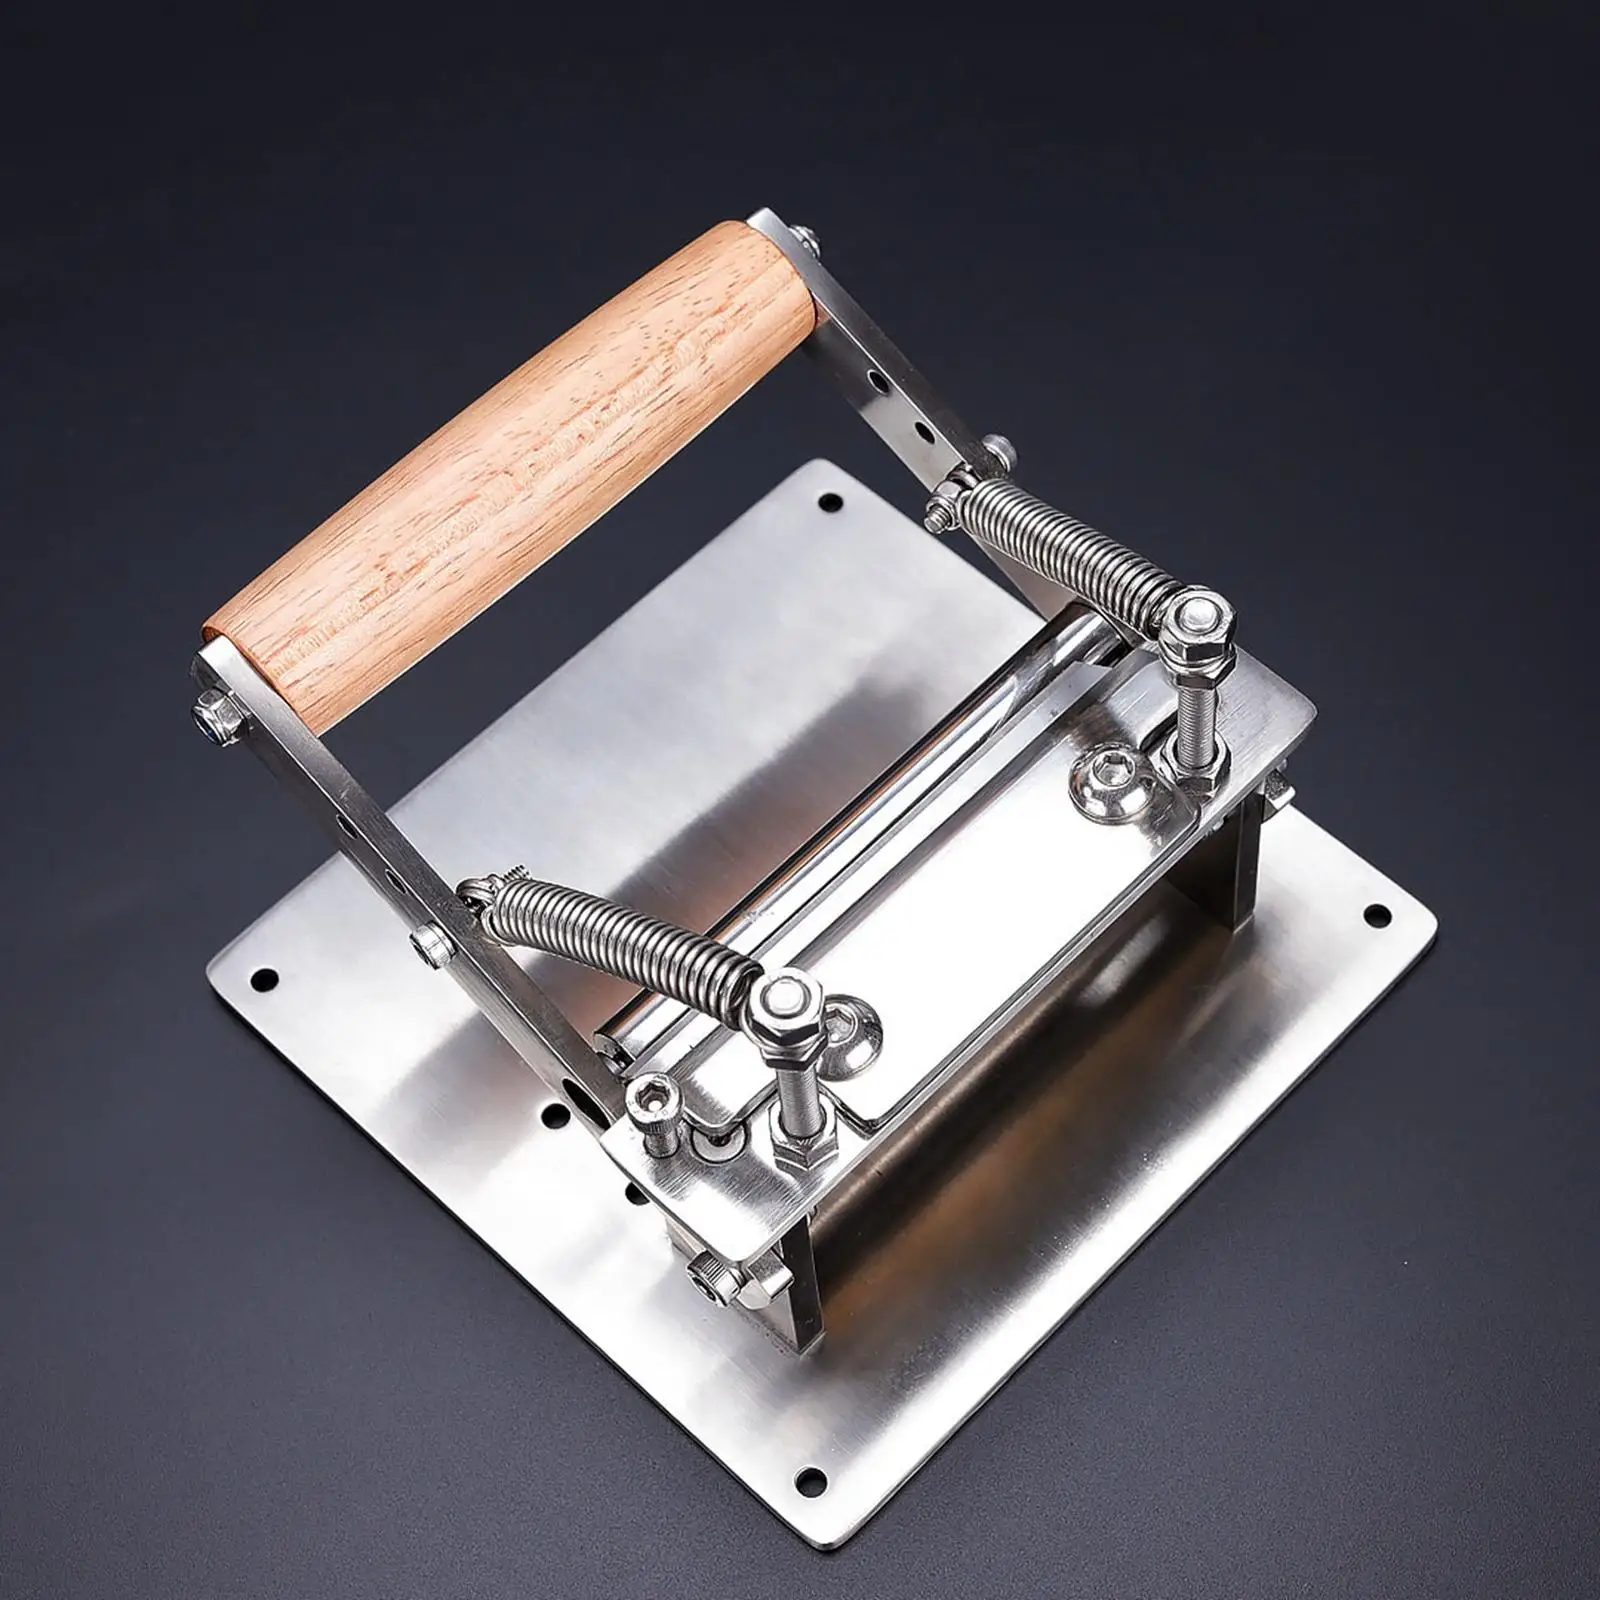 Manual Leather Peeling Machine Leather Thinner Leather Skiver Hand Tool